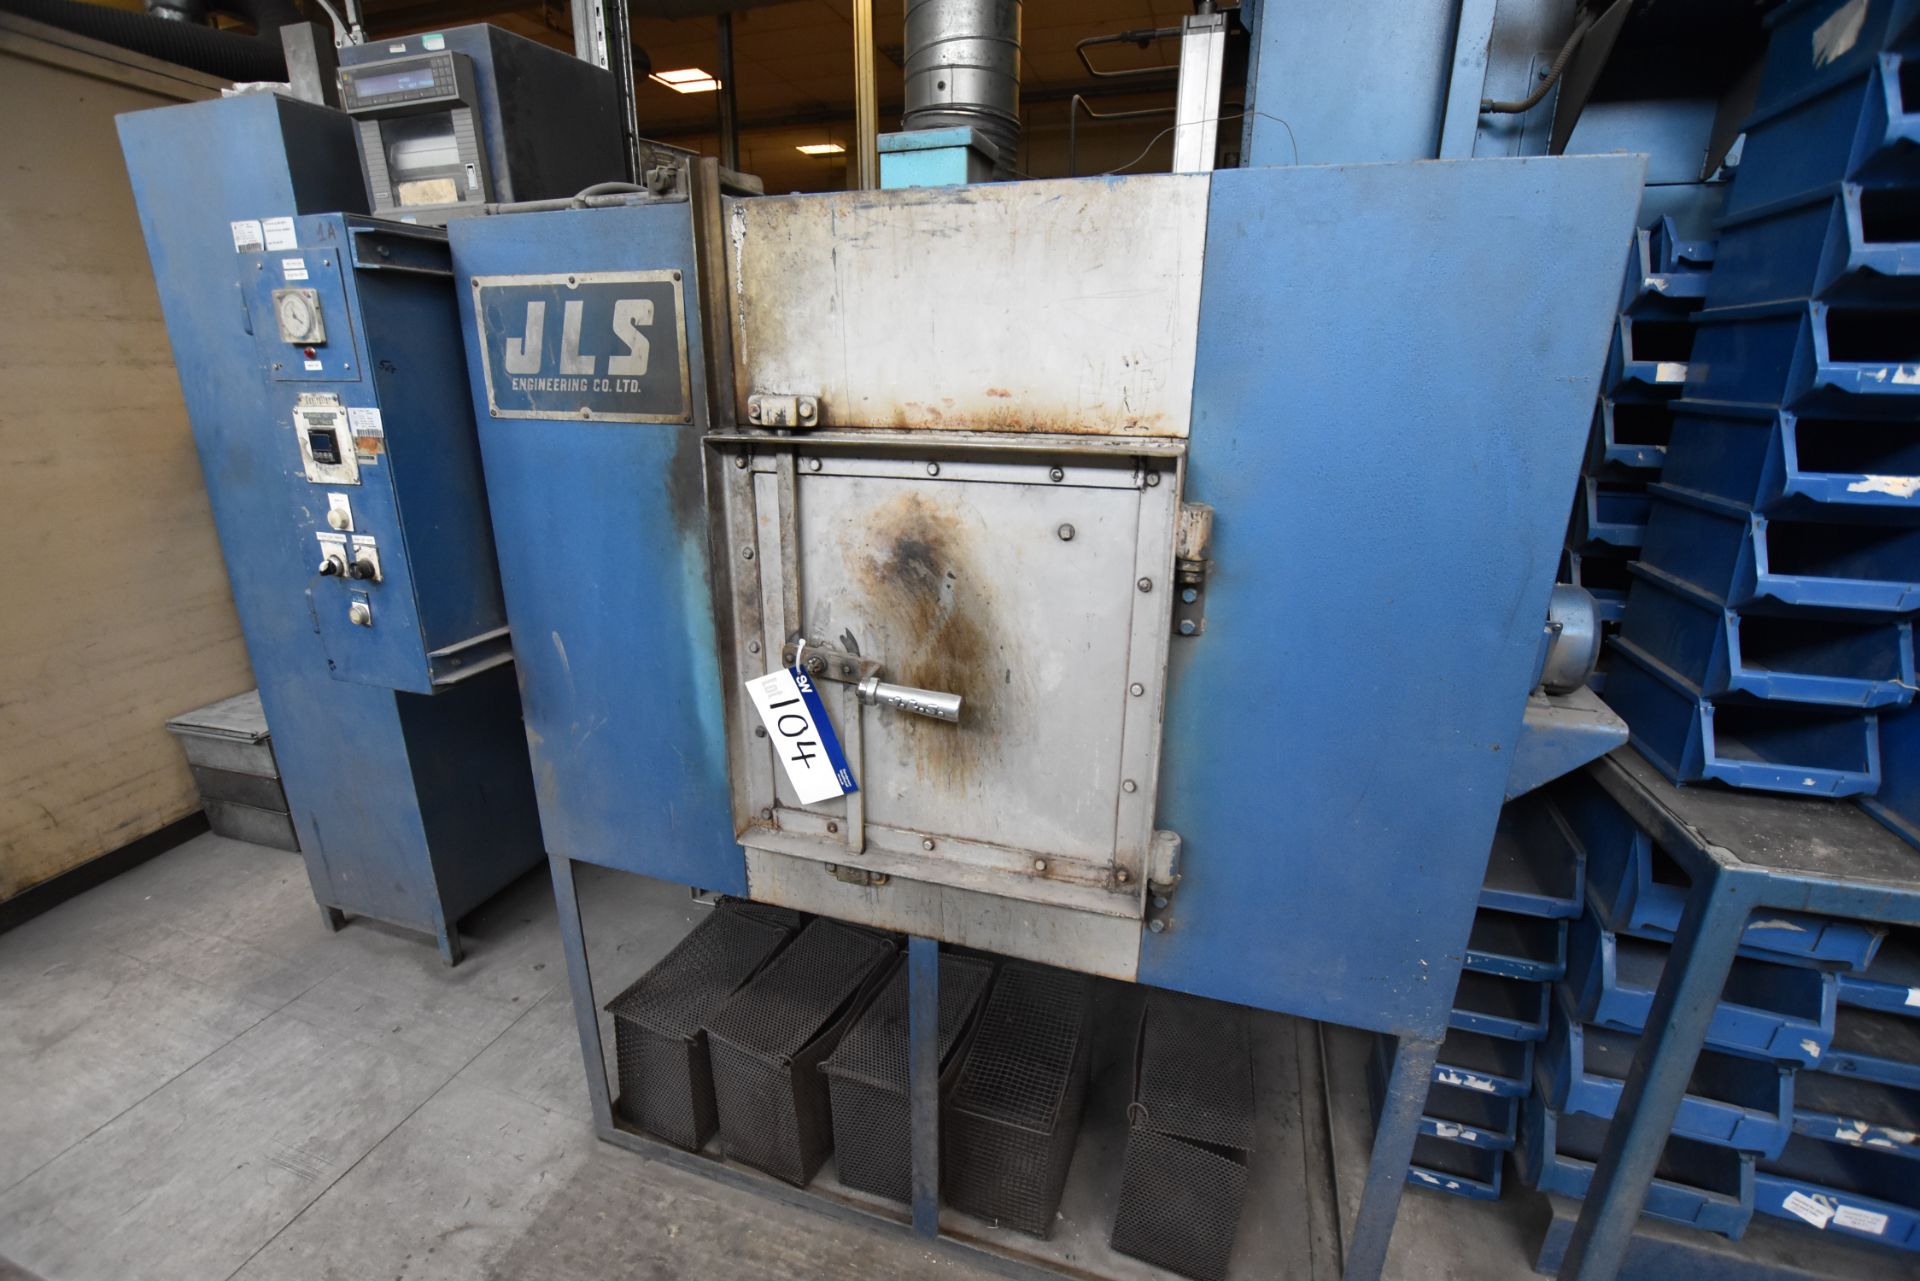 JLS Engineering Electric Batch Type Heat Treatment Oven, 550⁰c max temp, serial number: 79/3441